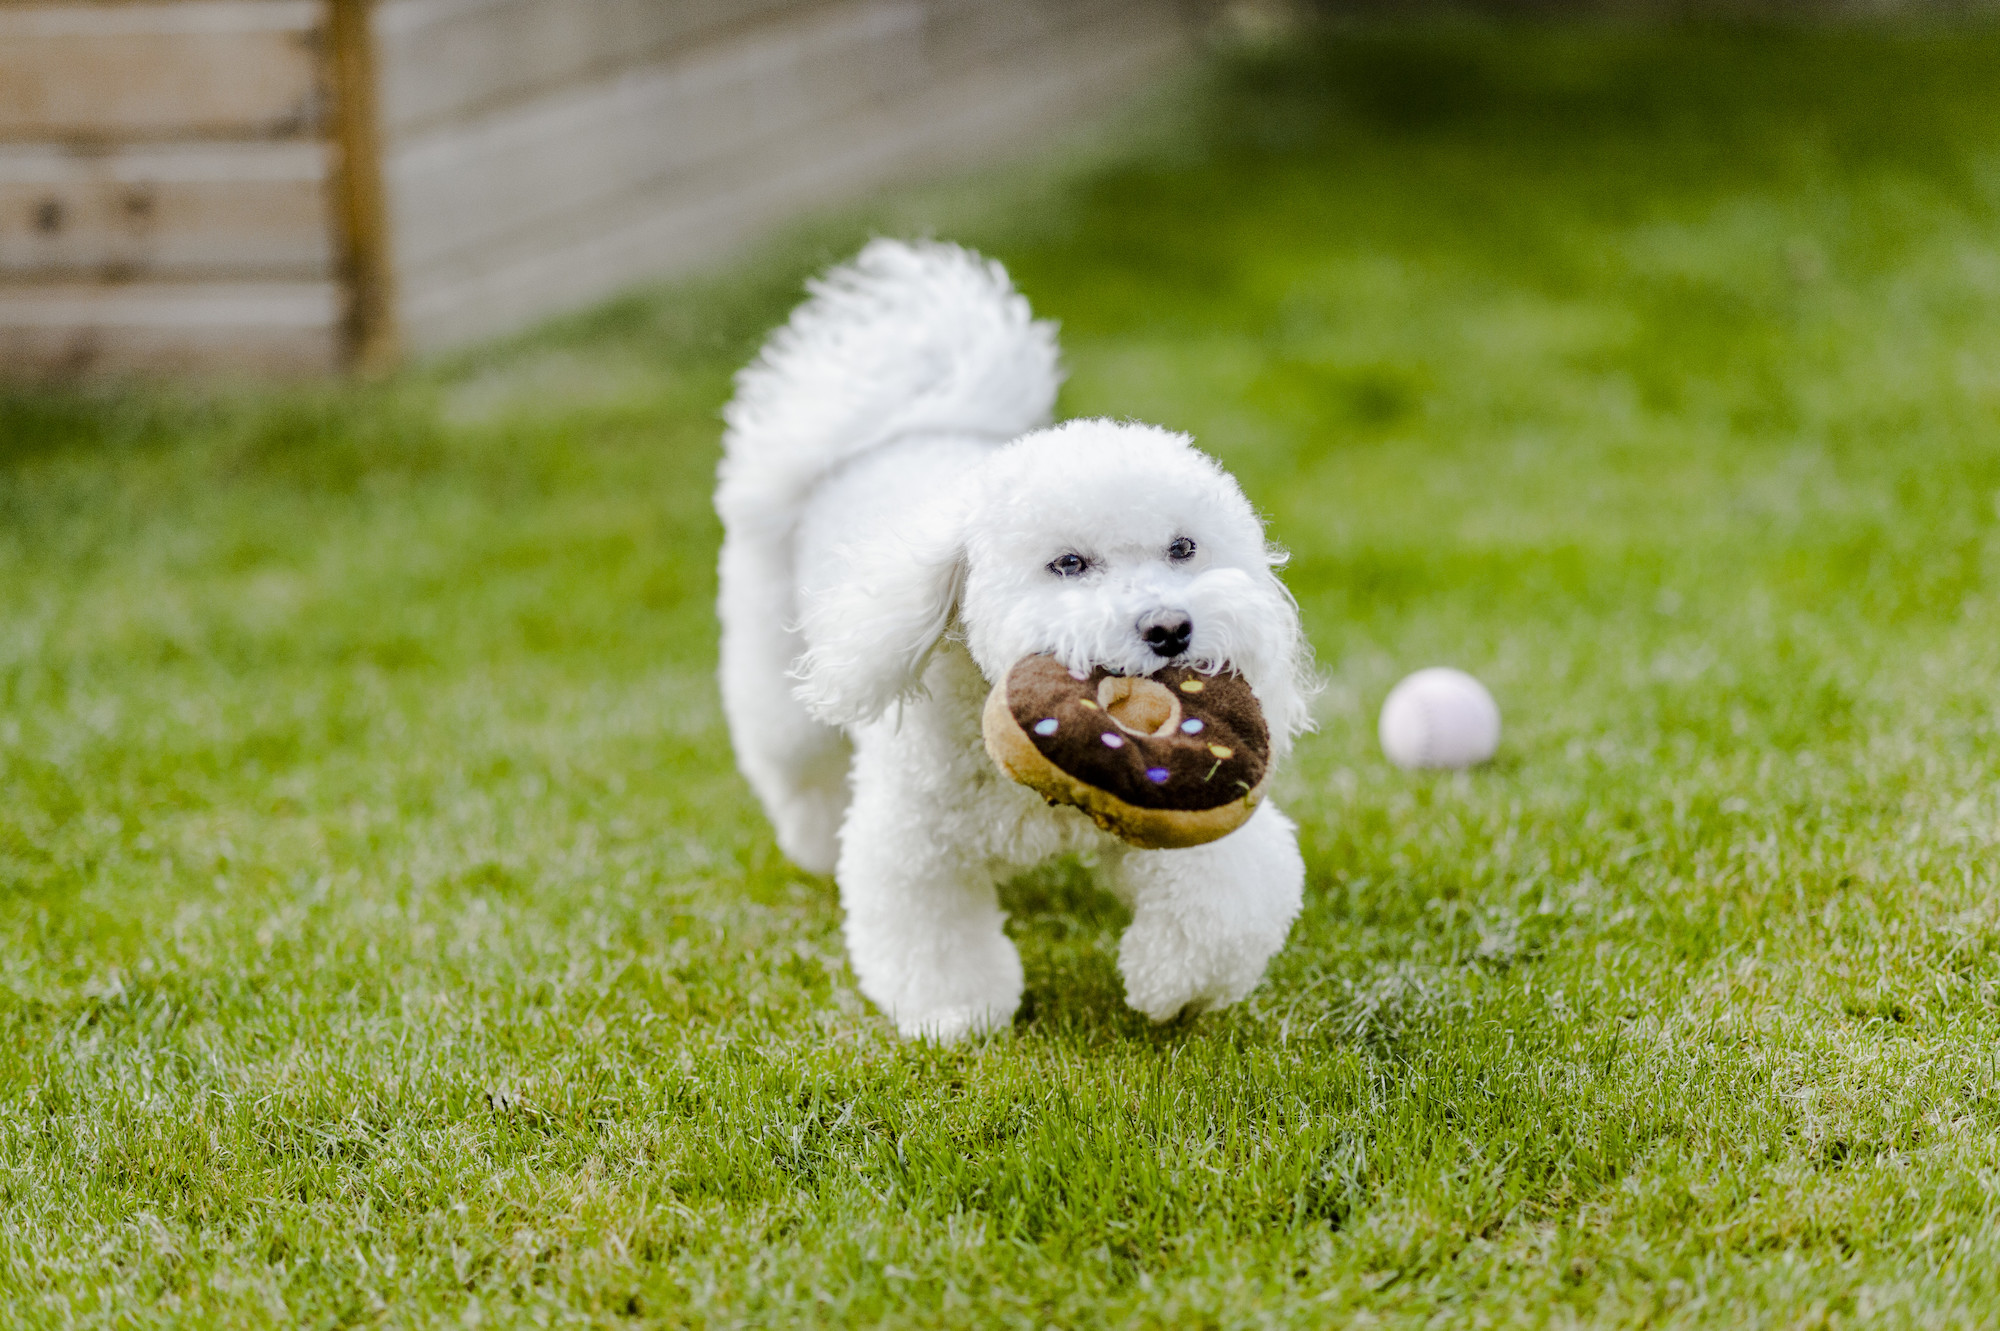 A white fluffy dog with a toy doughnut 